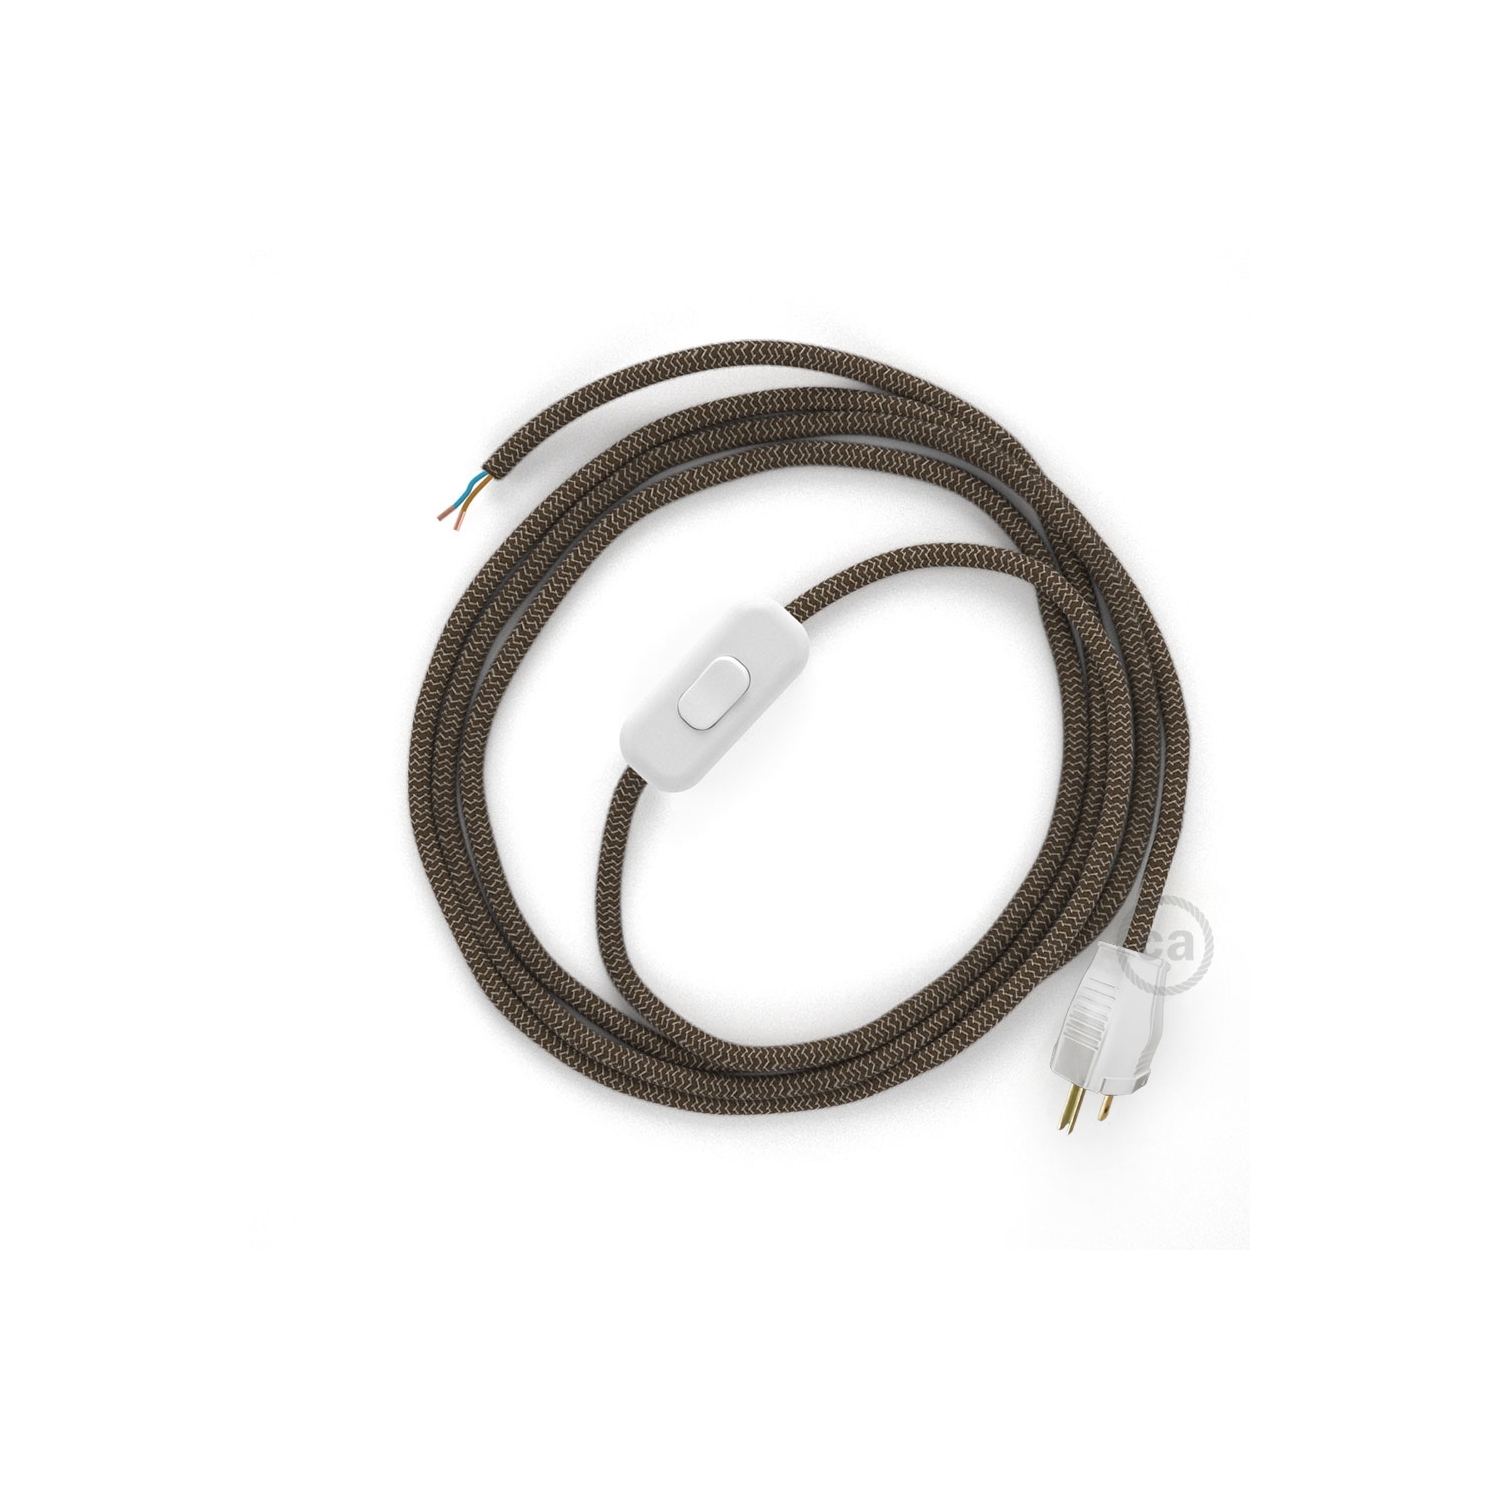 Power Cord with in-line switch, RD73 Natural & Brown Linen Chevron - Choose color of switch/plug